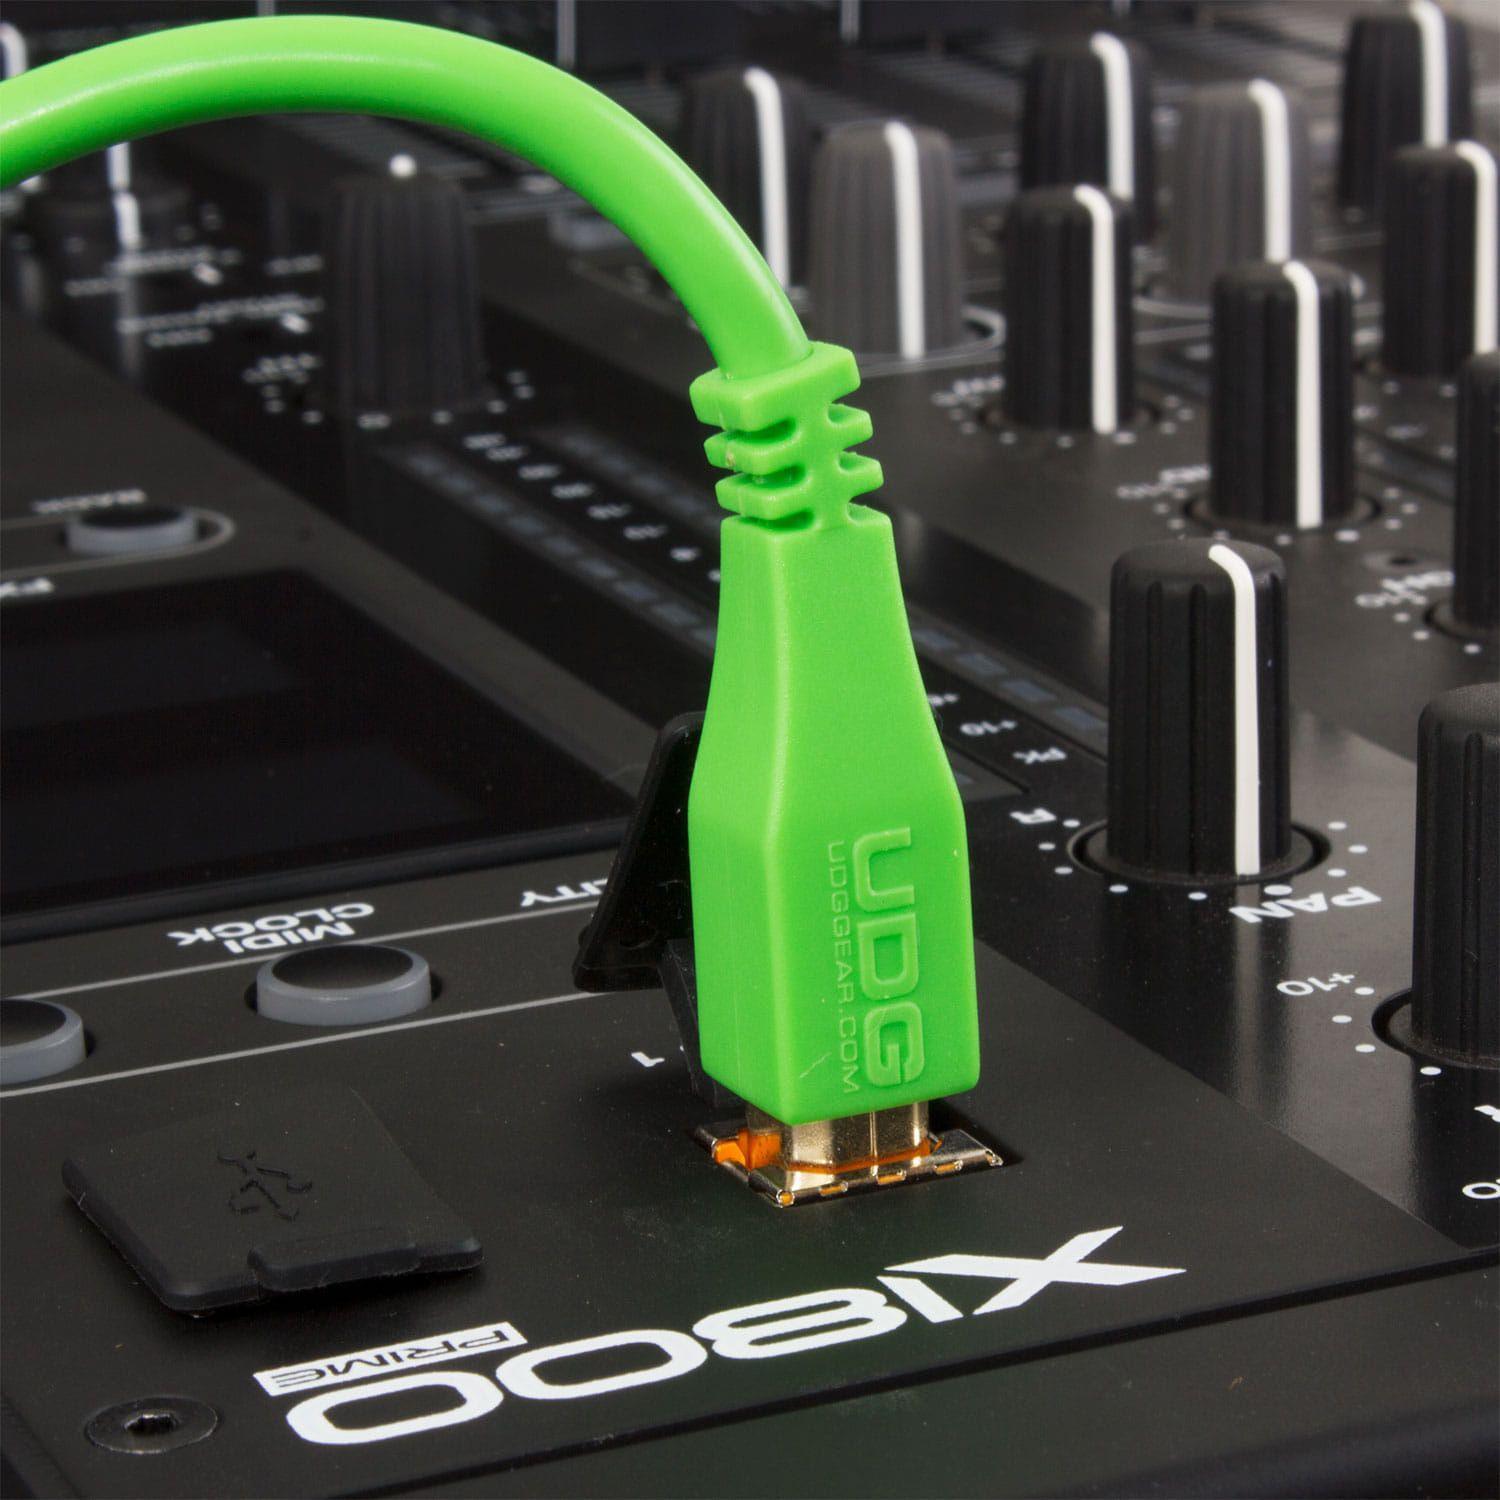 UDG Cable USB 2.0 (Type C-B) Straight 1.5M Green - DY Pro Audio